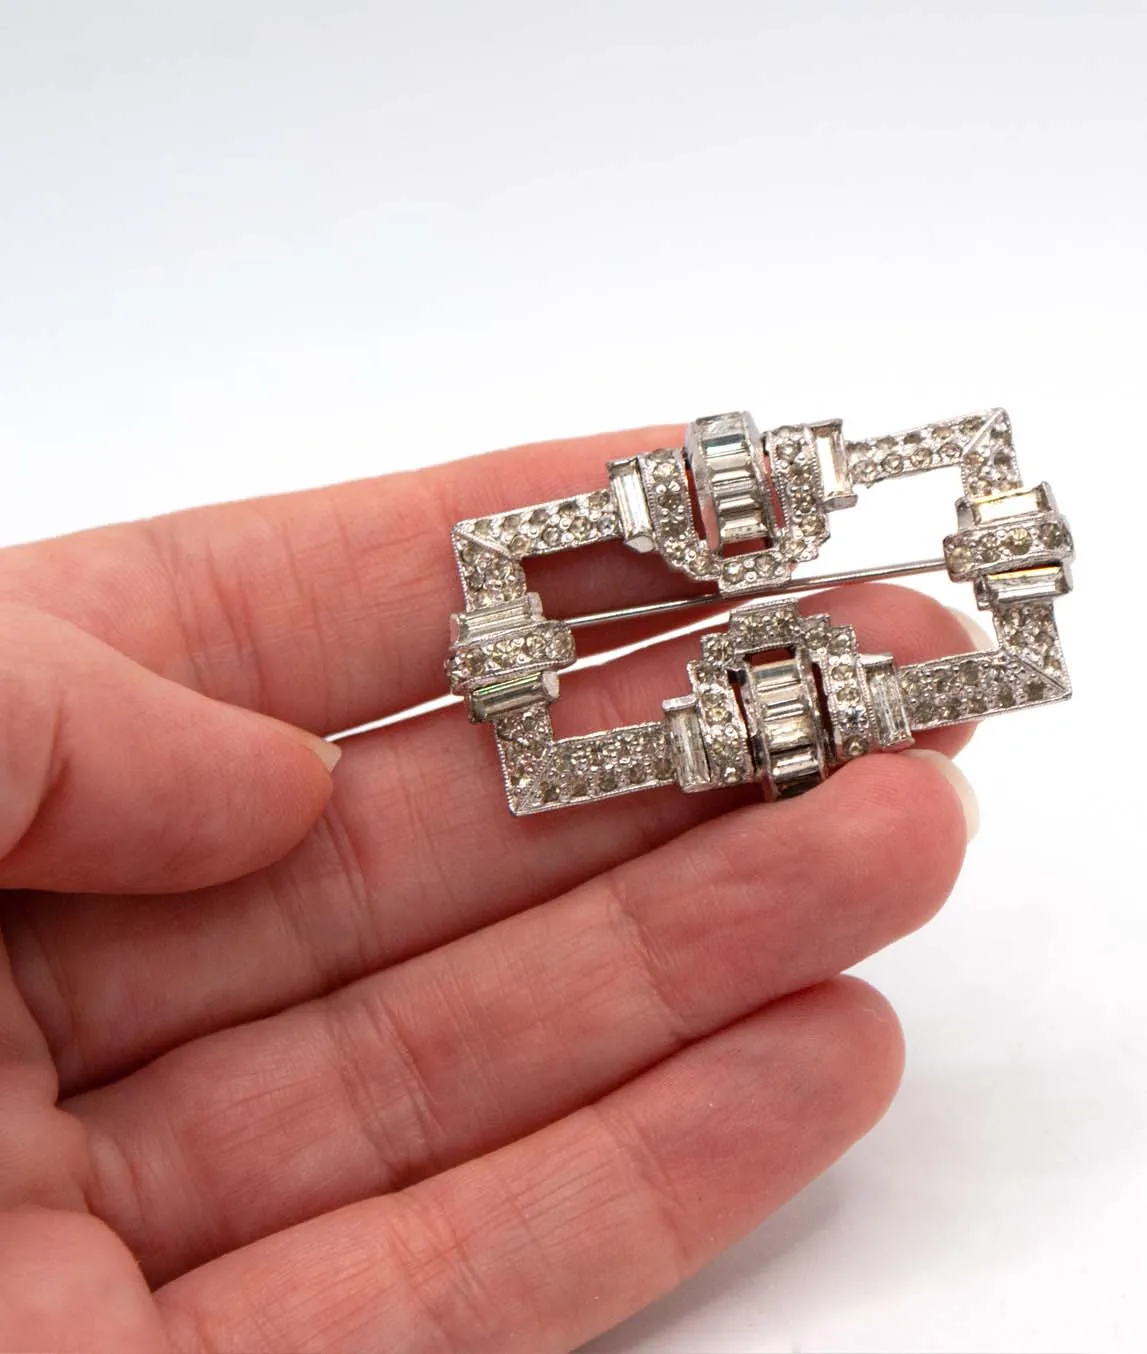 Art Deco 1930s Trifari KTF brooch silver with clear crystals